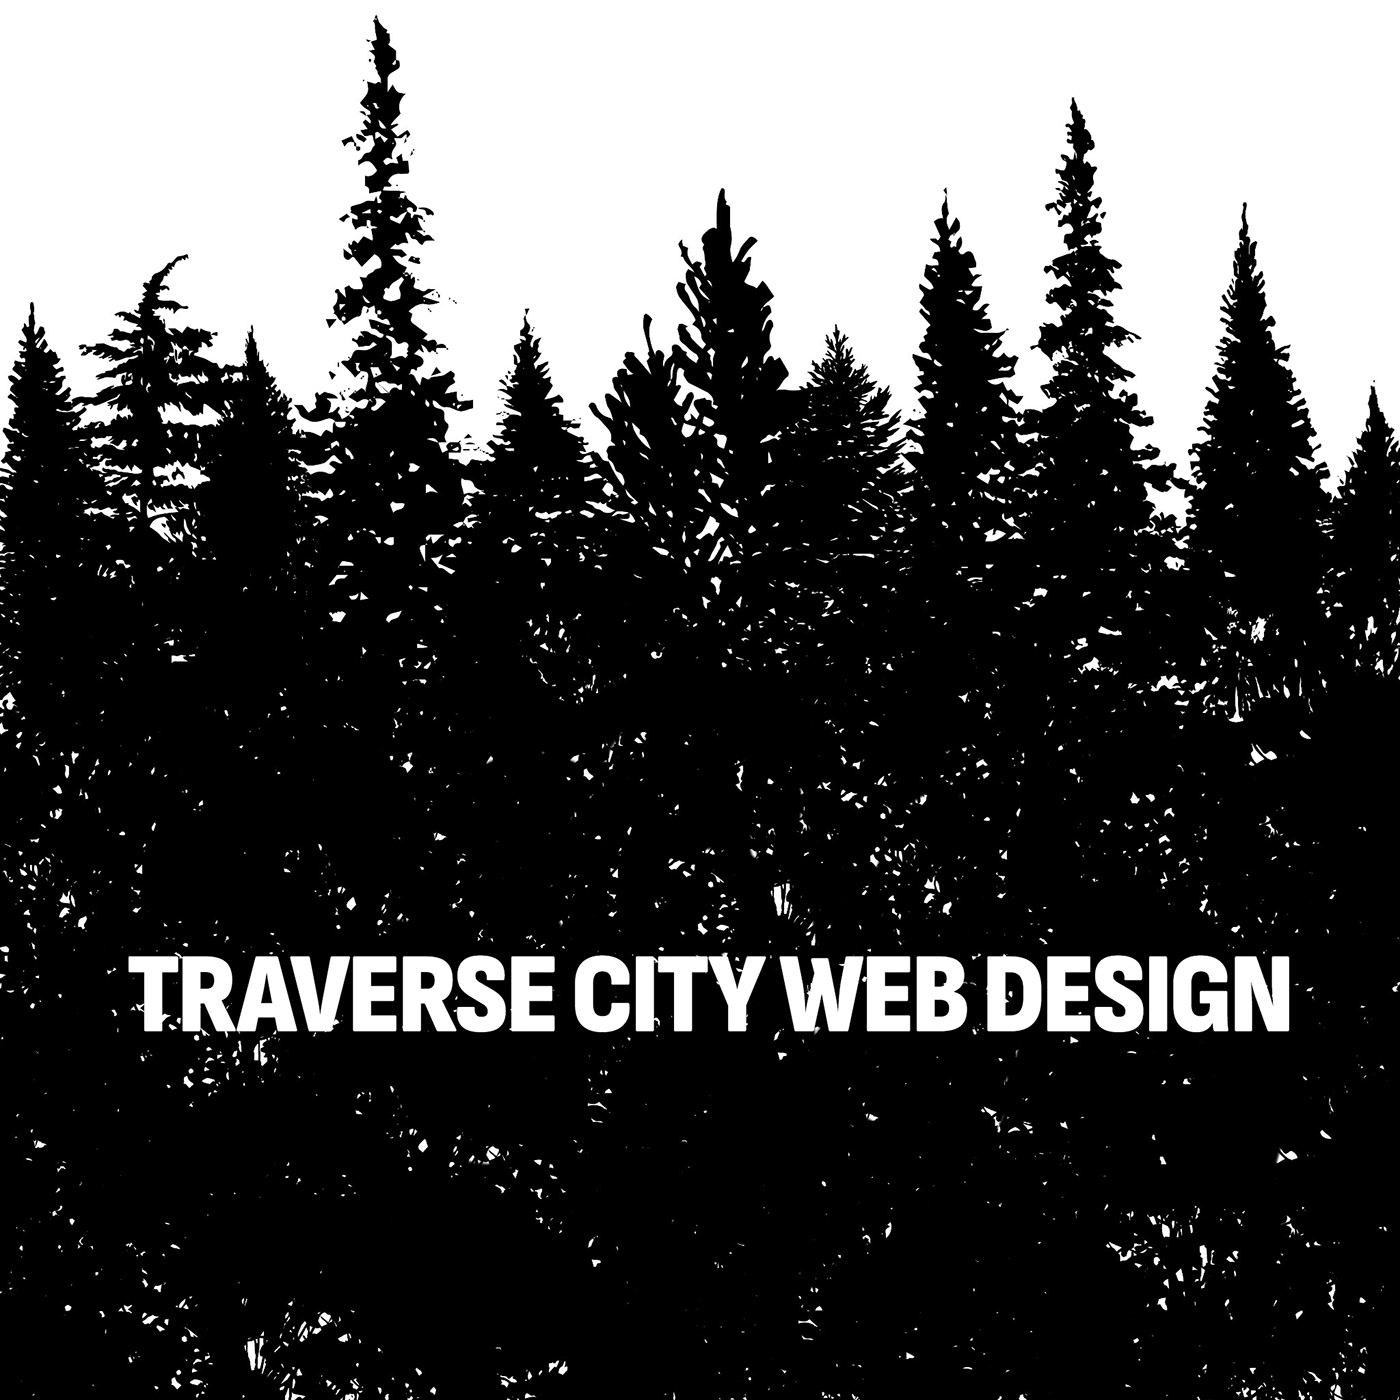 Web Design  logo graphic design  northern forest adventure extreme mountains maps pines